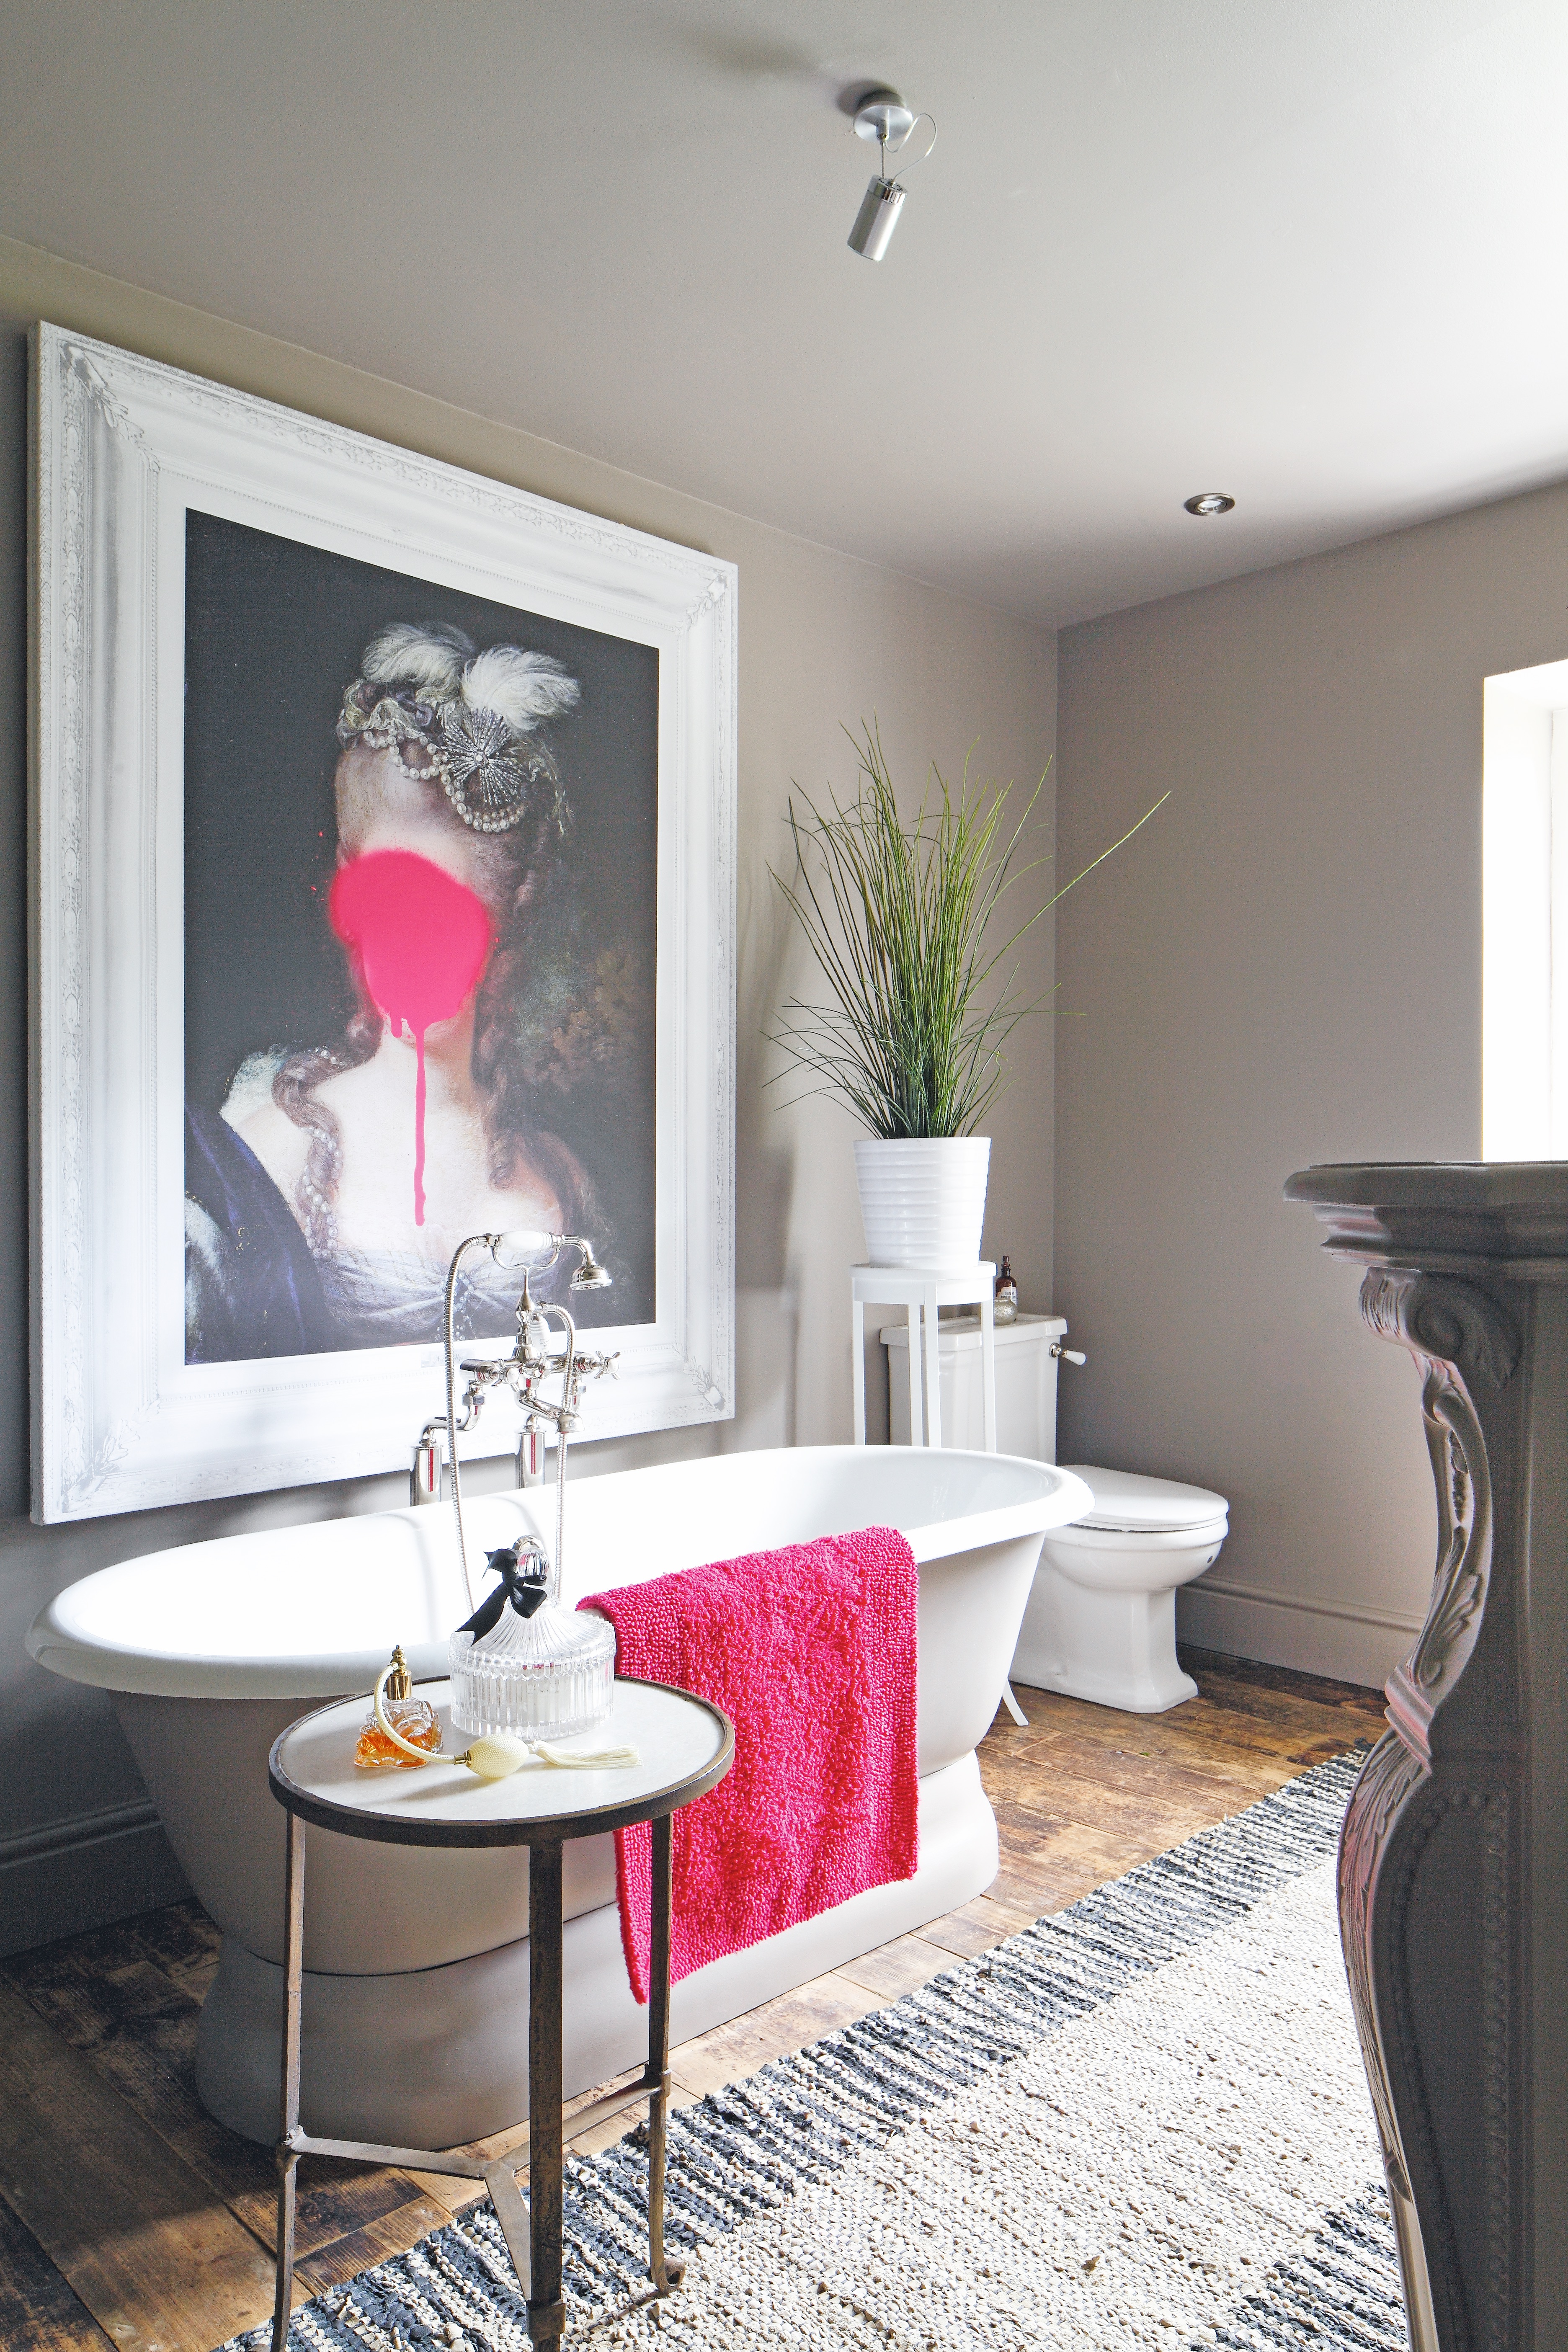 traditional style bathroom with white scheme, freestanding bath and large piece of artwork with modern twist